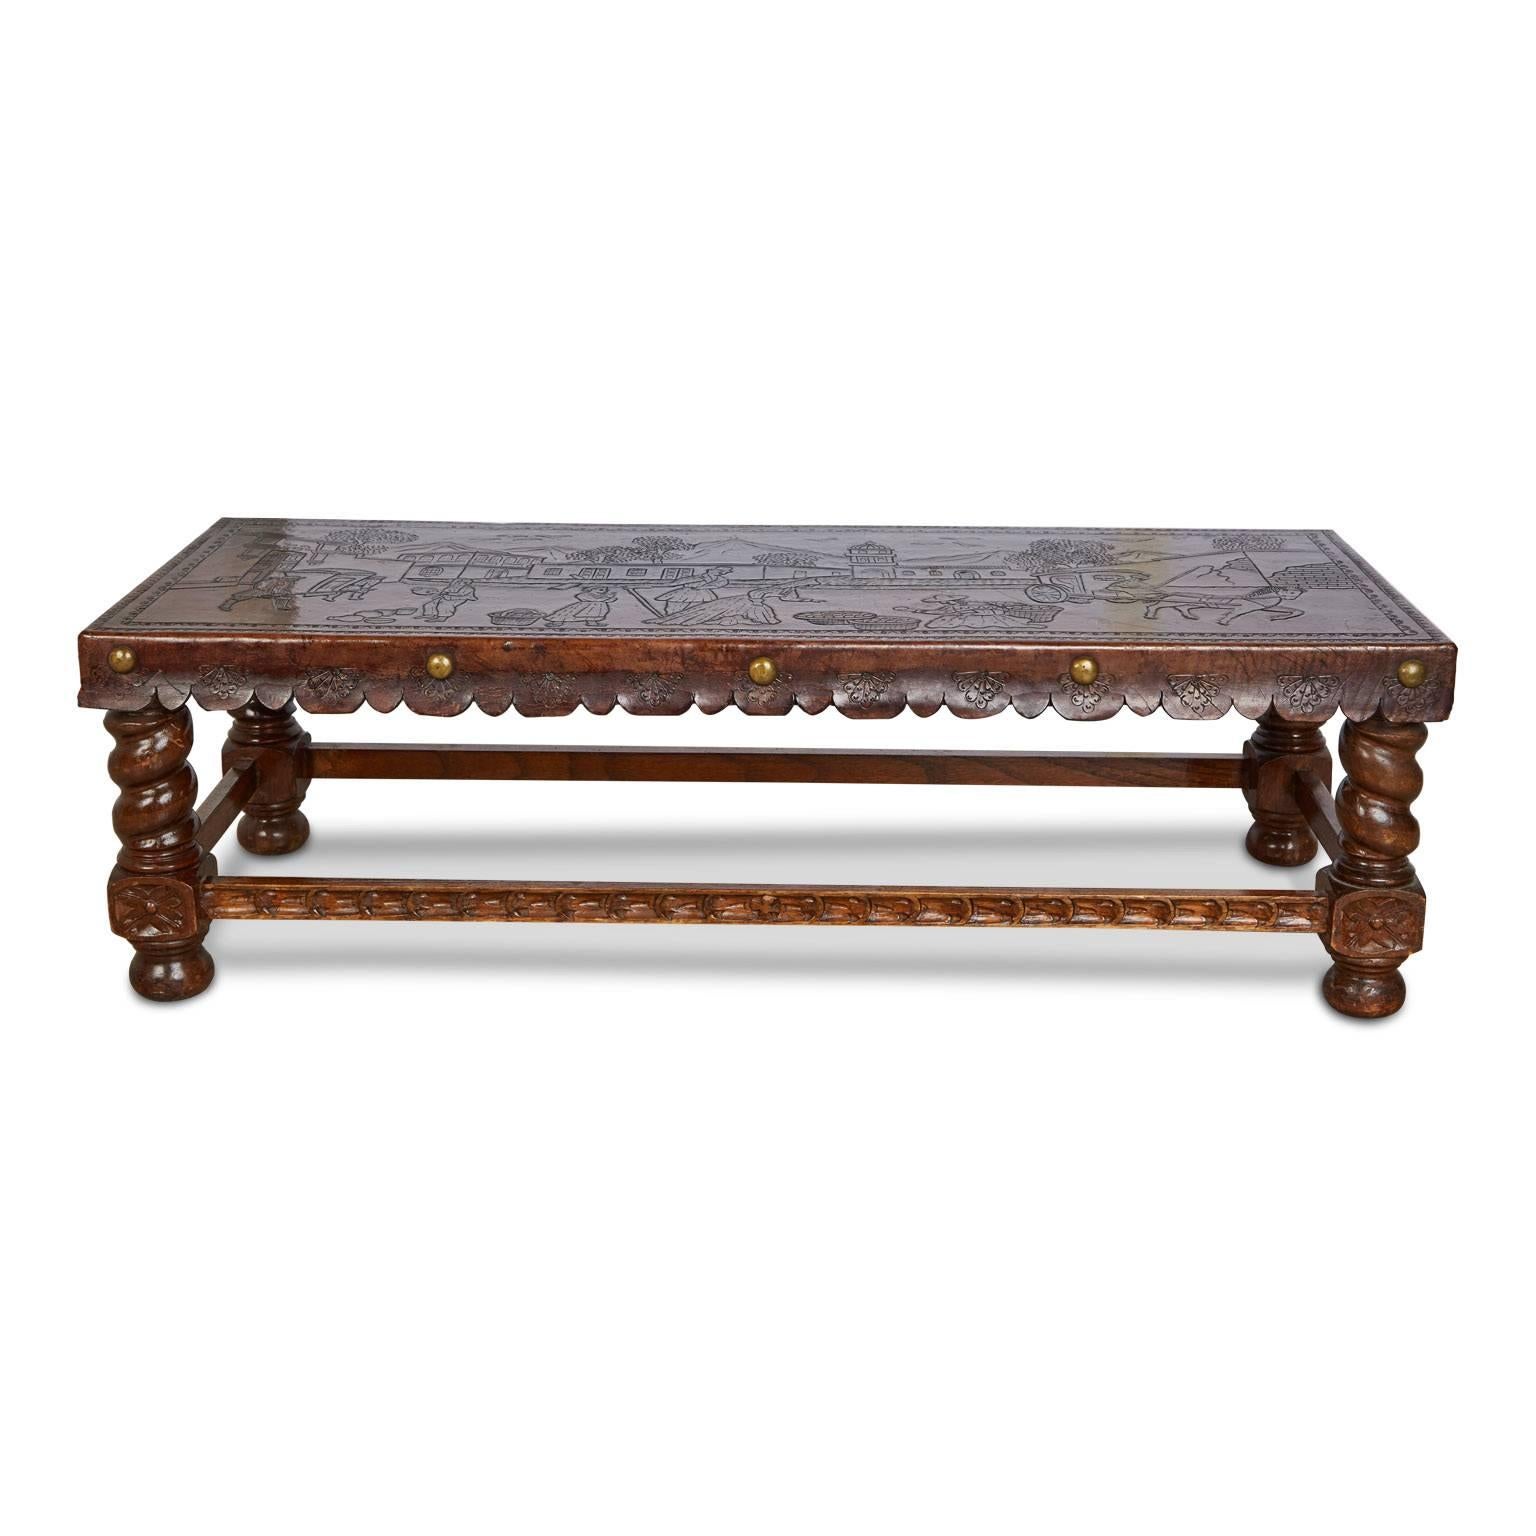 Beautifully crafted hand tooled bench or coffee table (can be used for either) depicting a colonial missionary Scene. Fabricated from a walnut frame and turned wood legs with carved details. The top is wrapped in a deep toned leather with a